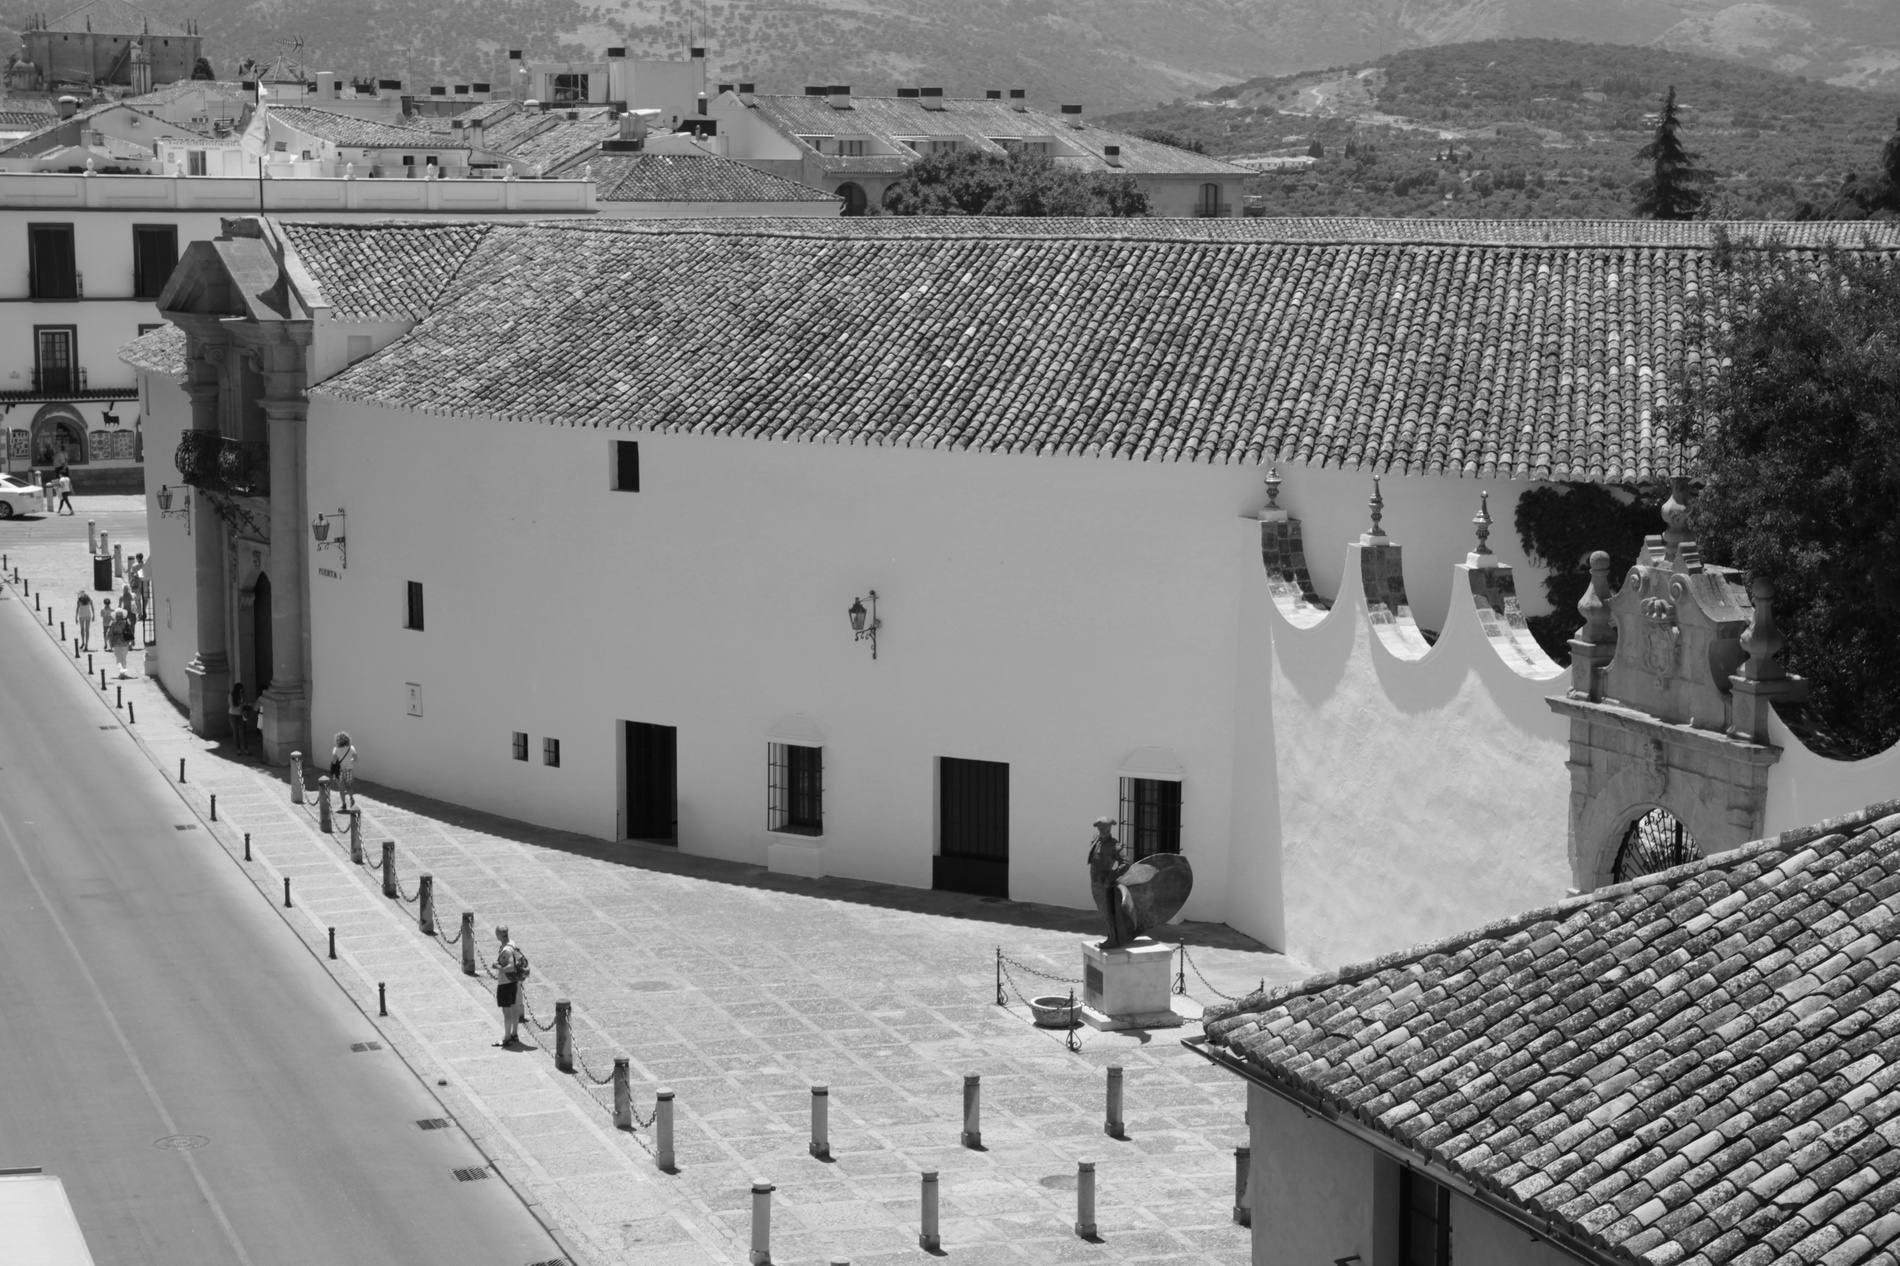 a black and white photo of a white building with a tiled roof=s1900